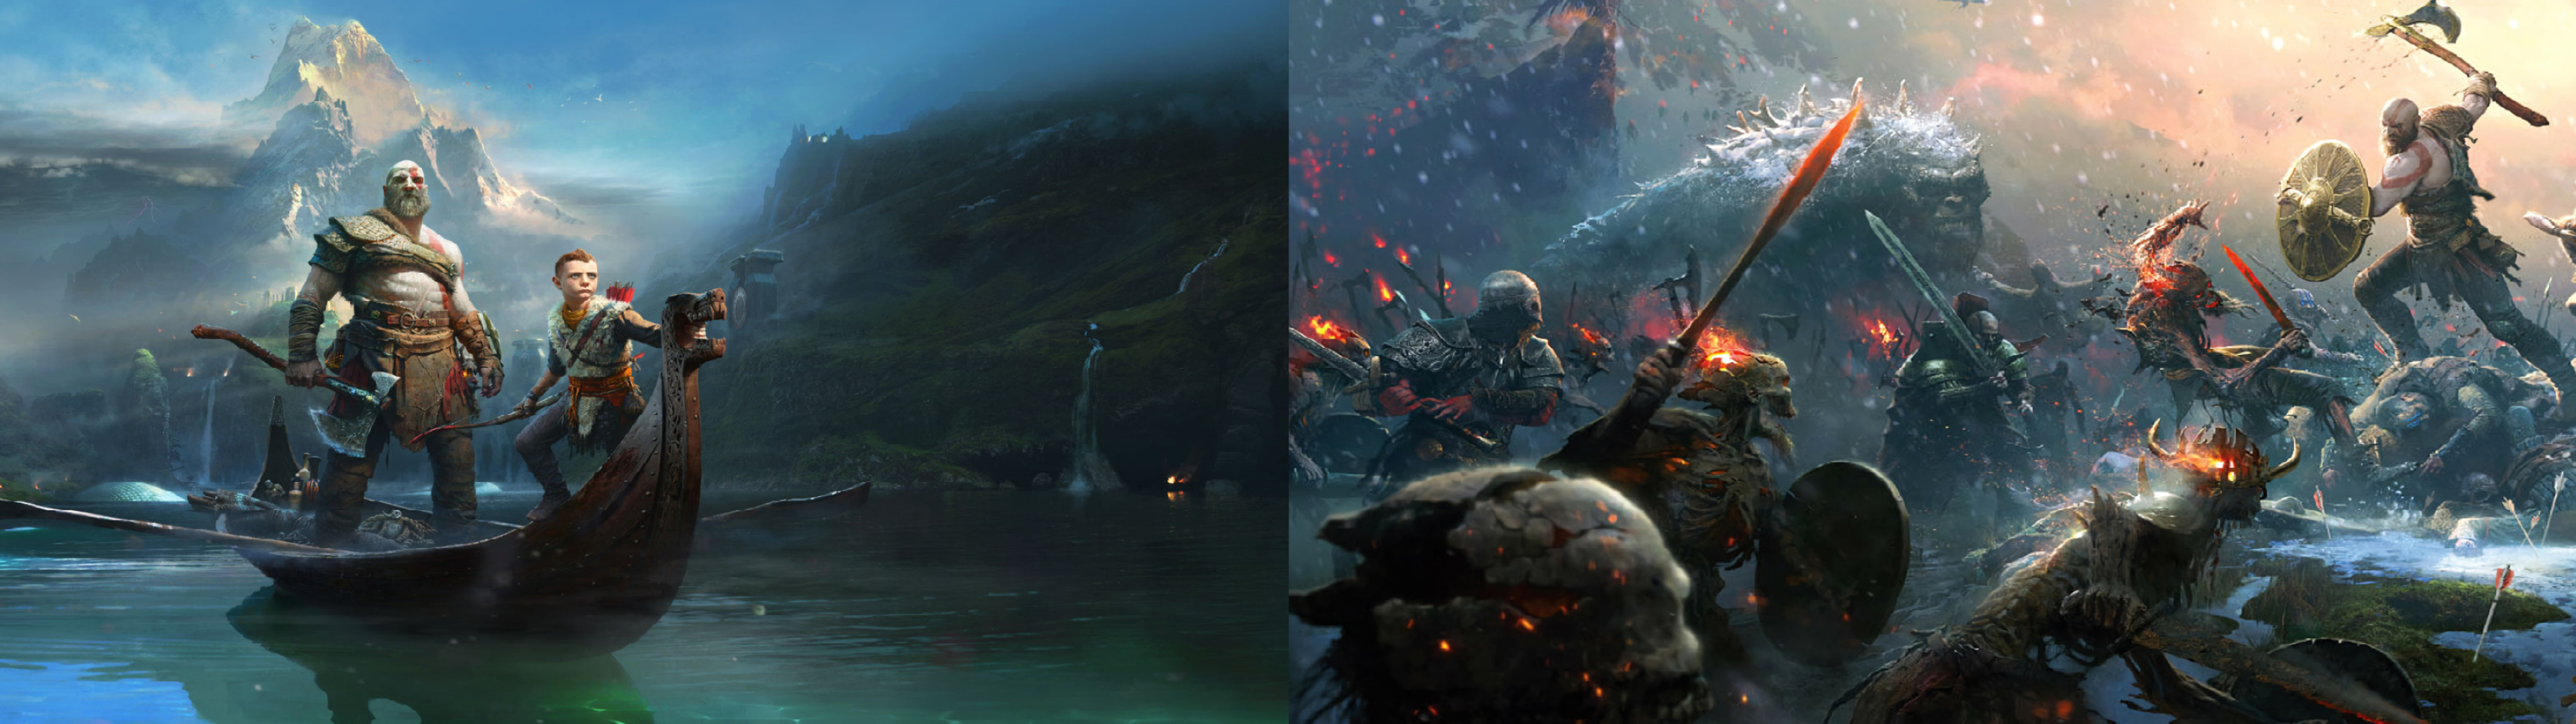 3840x1080 God of War. I couldn't find a dual monitor wallpaper, so I made one. [] : r/multiwall